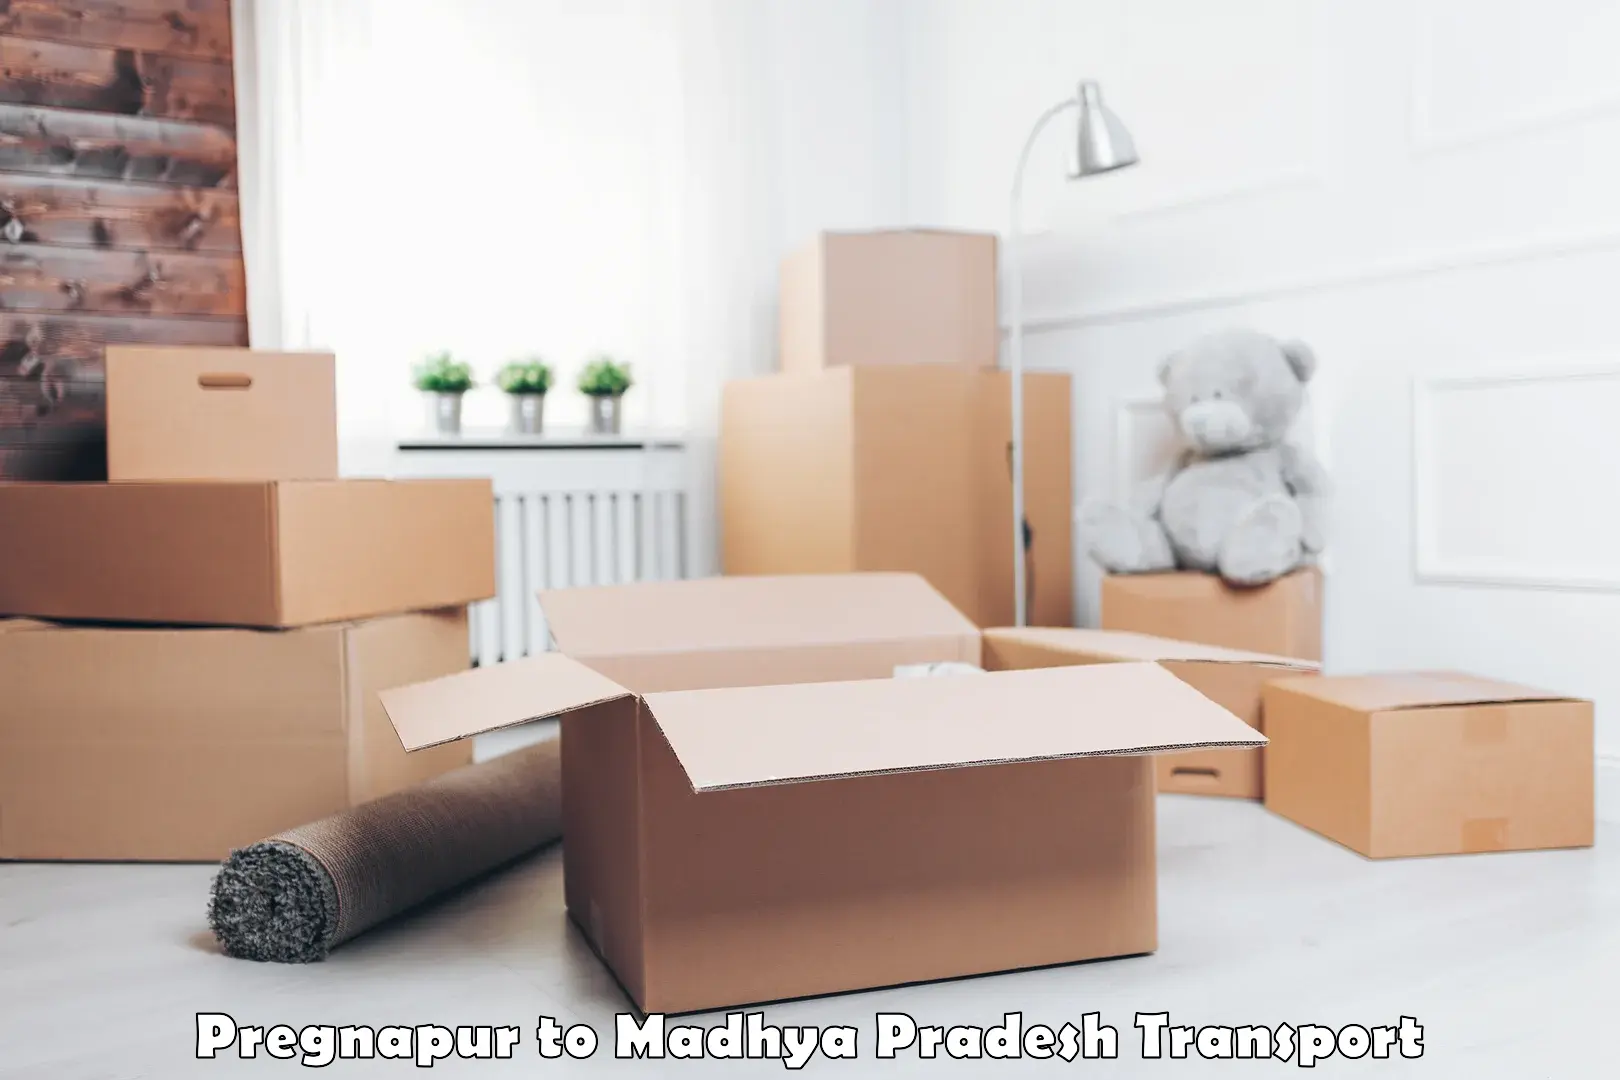 Package delivery services Pregnapur to Dhamnod